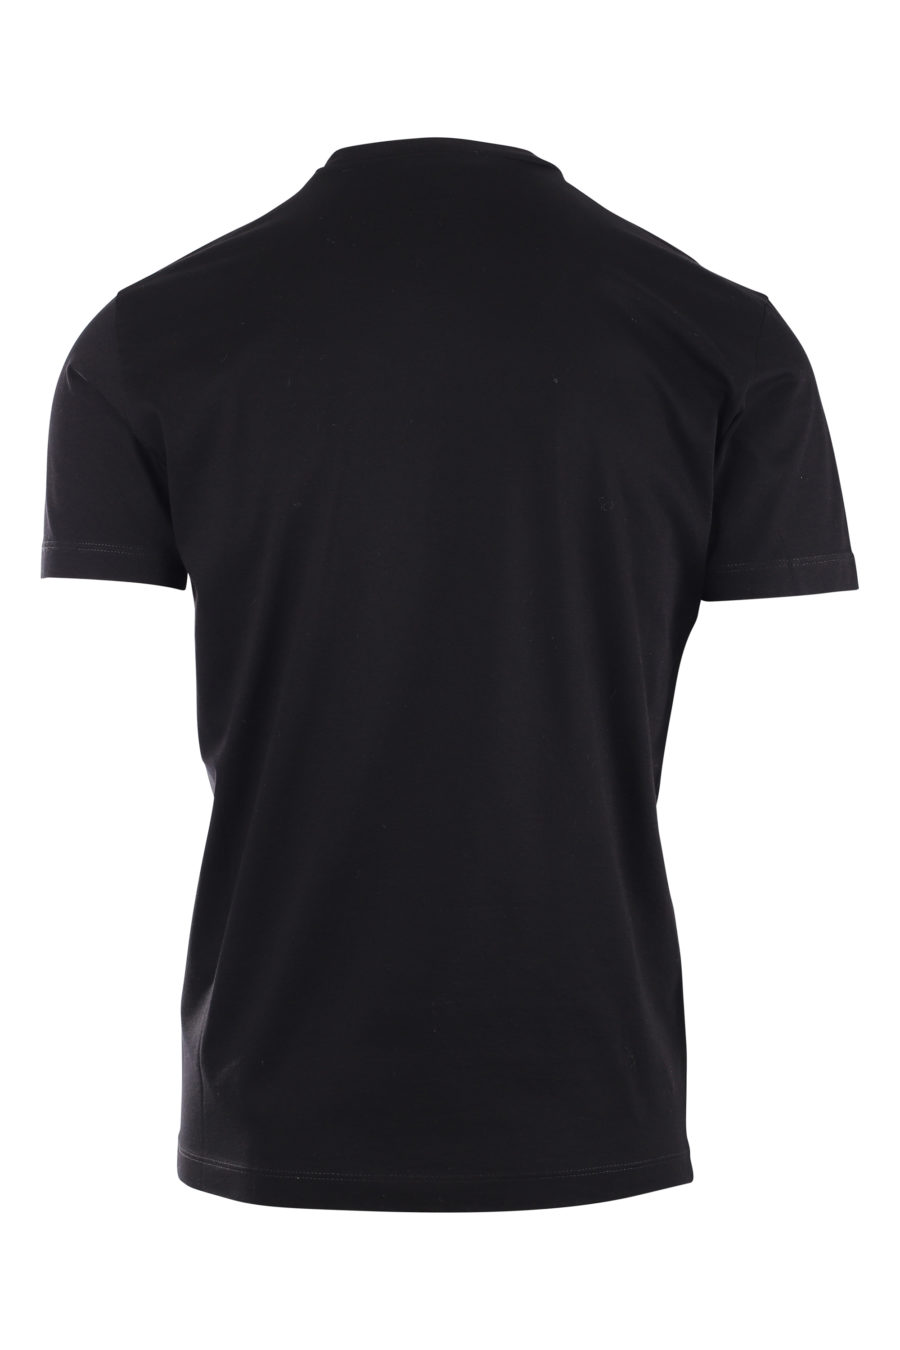 Black T-shirt with yellow vertical "icon" logo - IMG 9720